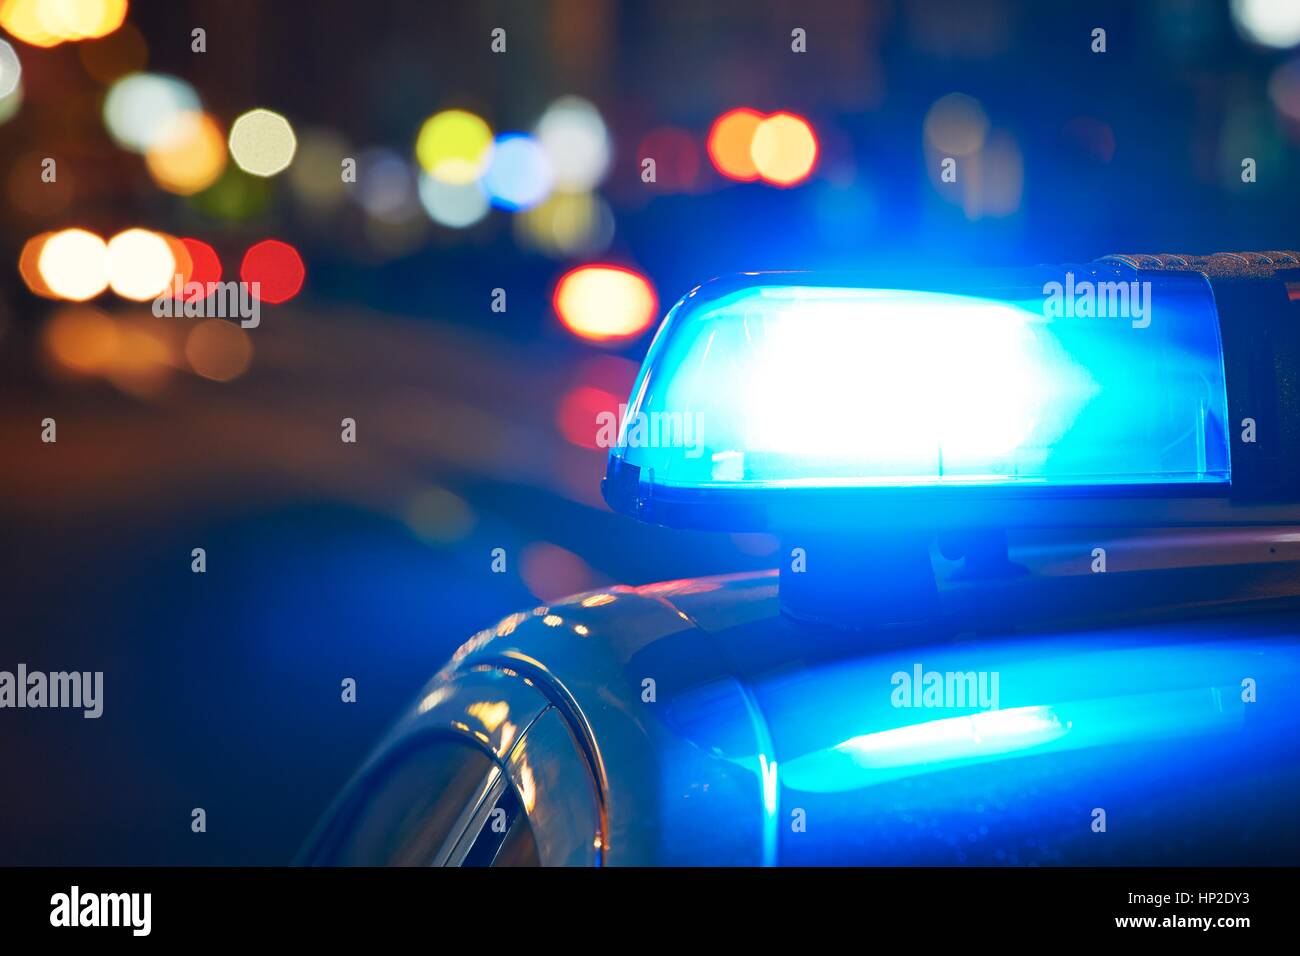 Police car on the street at night Stock Photo